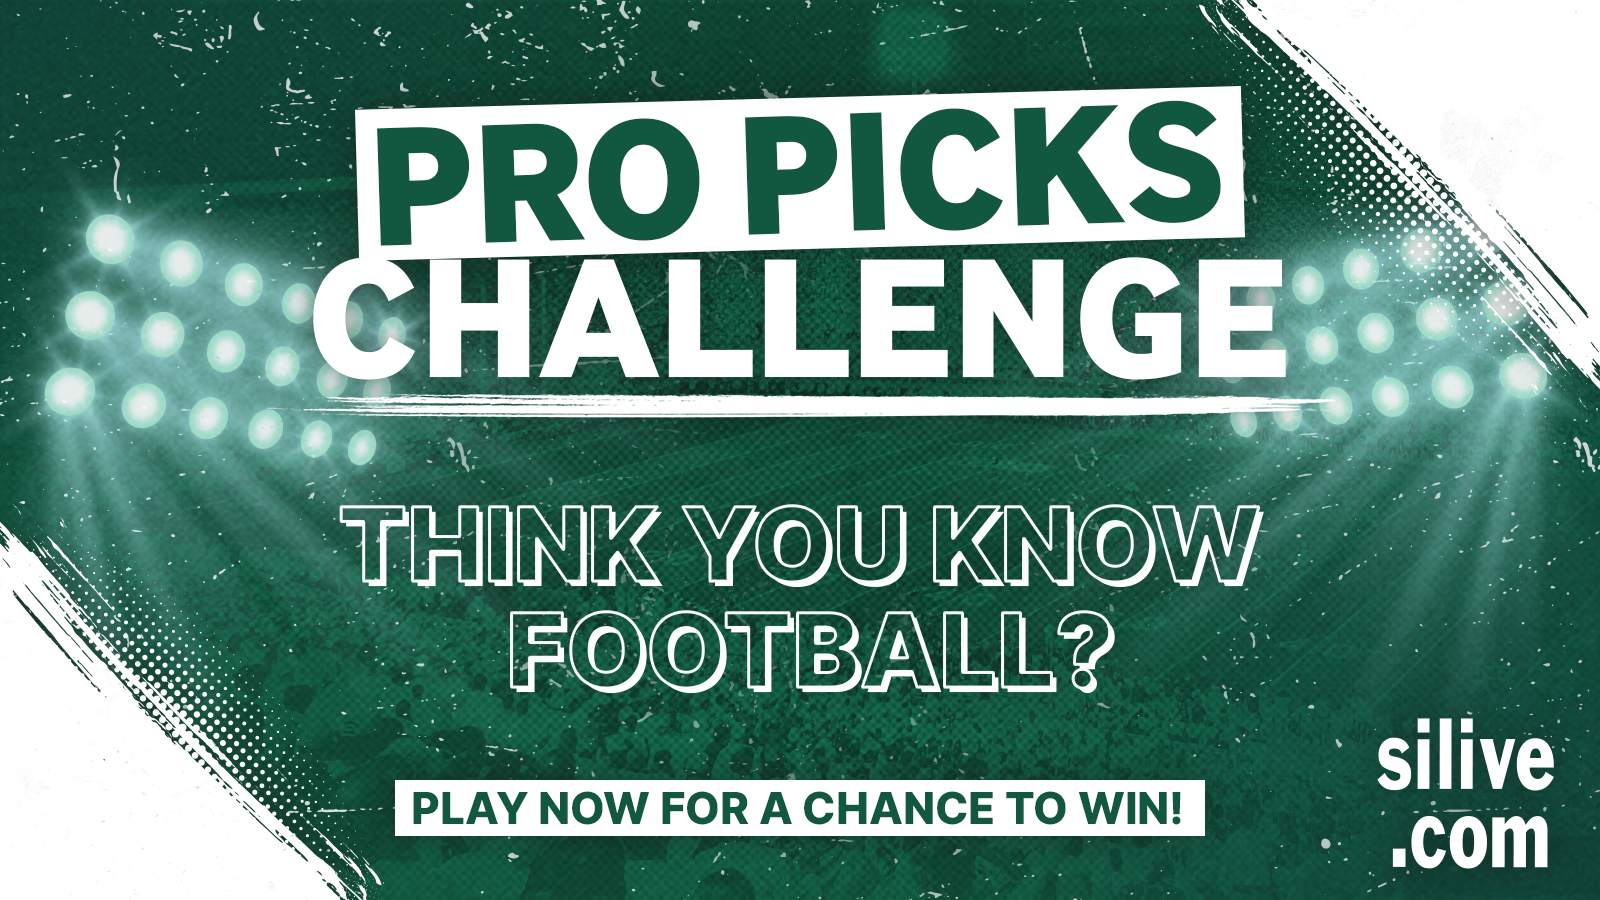 Try your luck at picking NFL games each week with our new Pro